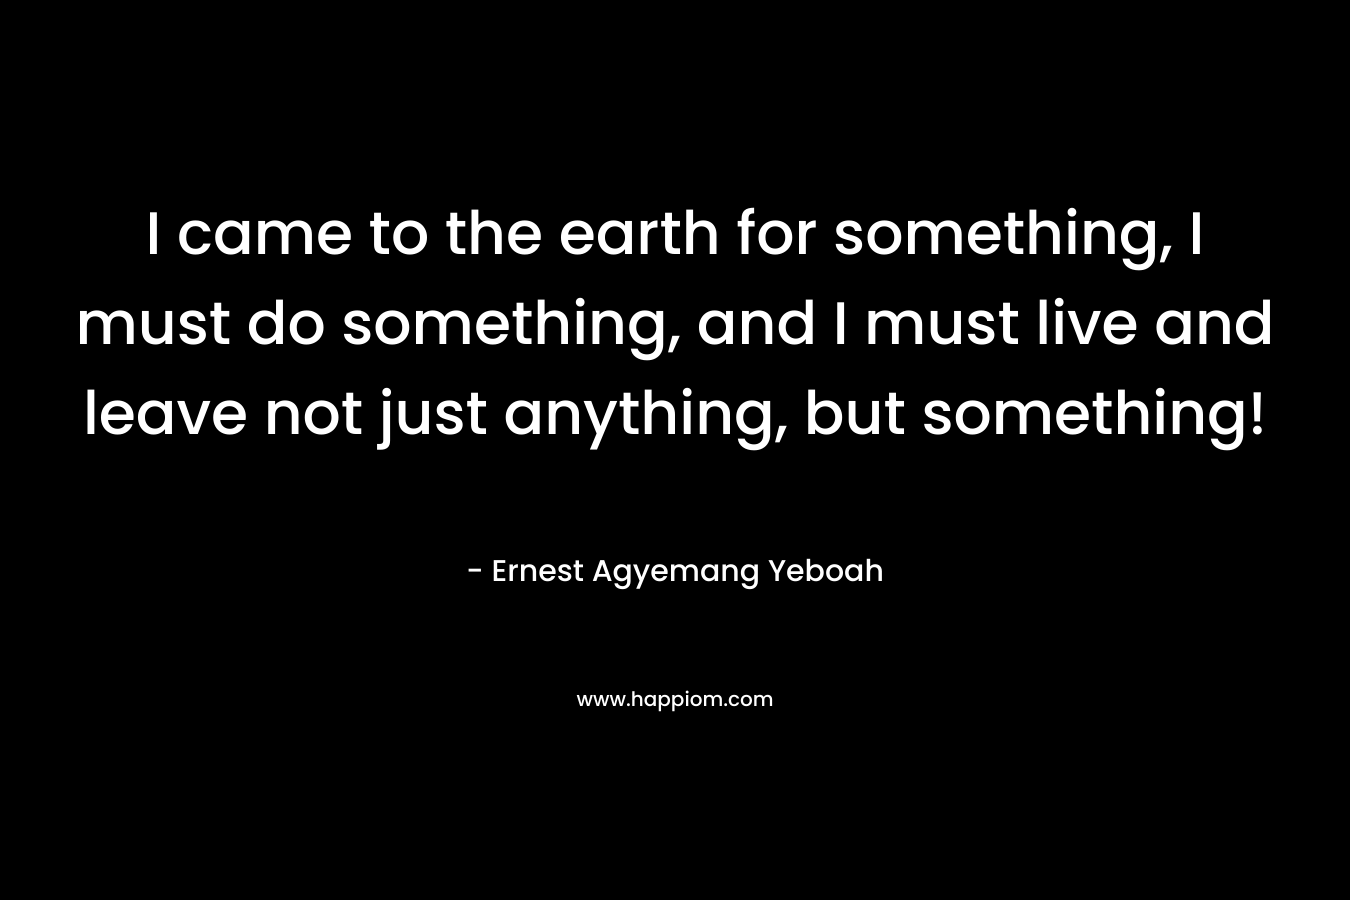 I came to the earth for something, I must do something, and I must live and leave not just anything, but something!